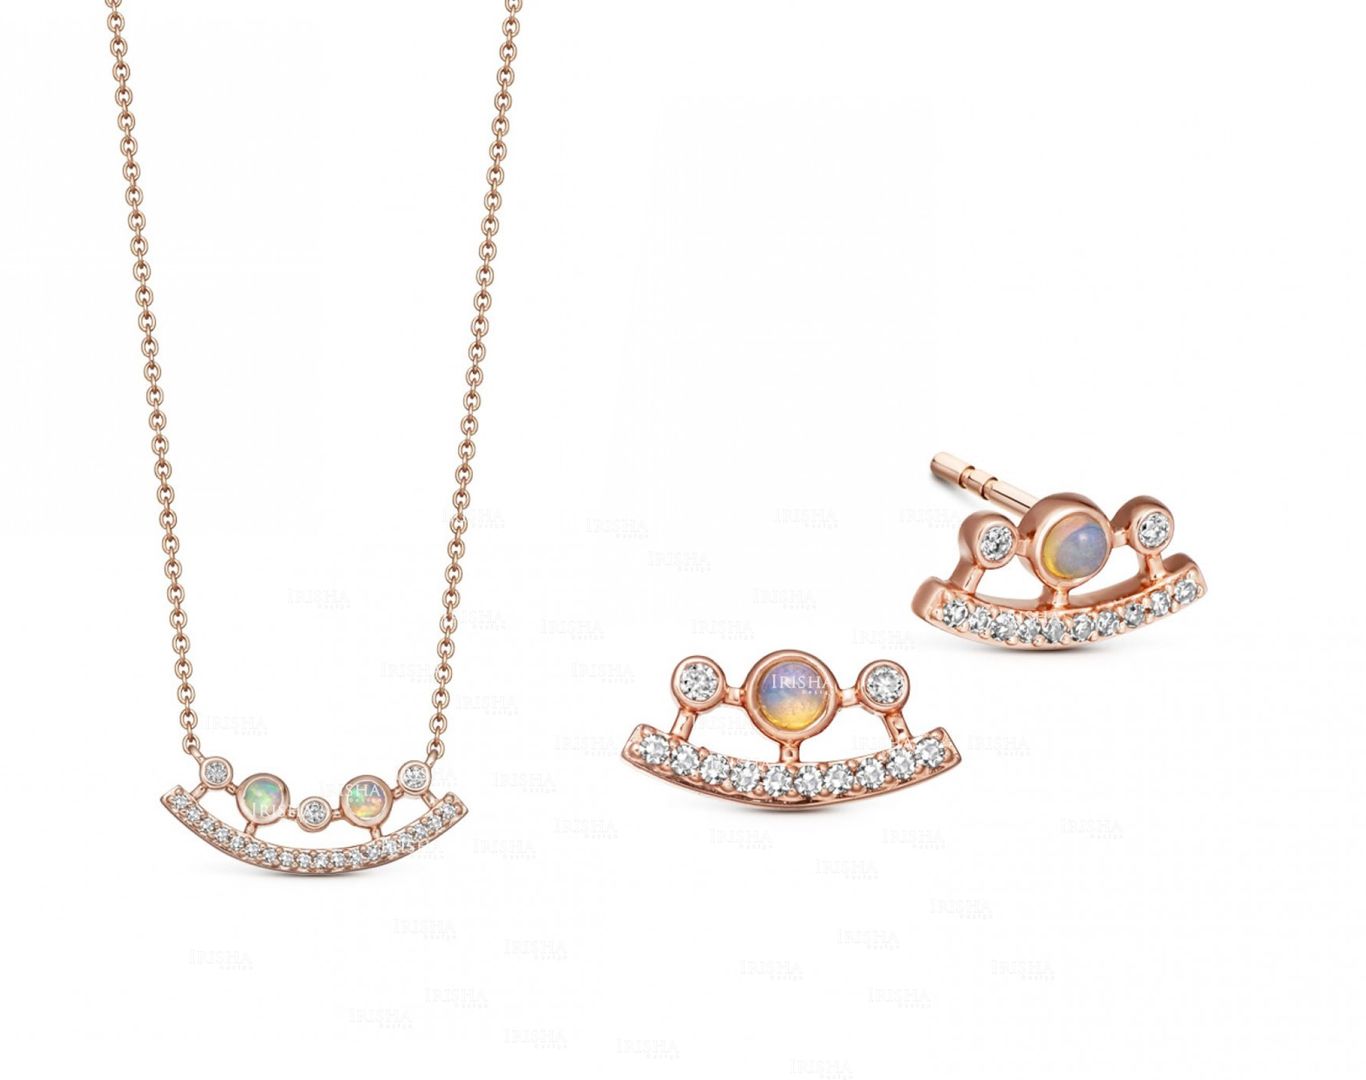 Genuine Diamond And Opal Gemstone Curved Earrings Necklace 14K Gold Jewelry Set